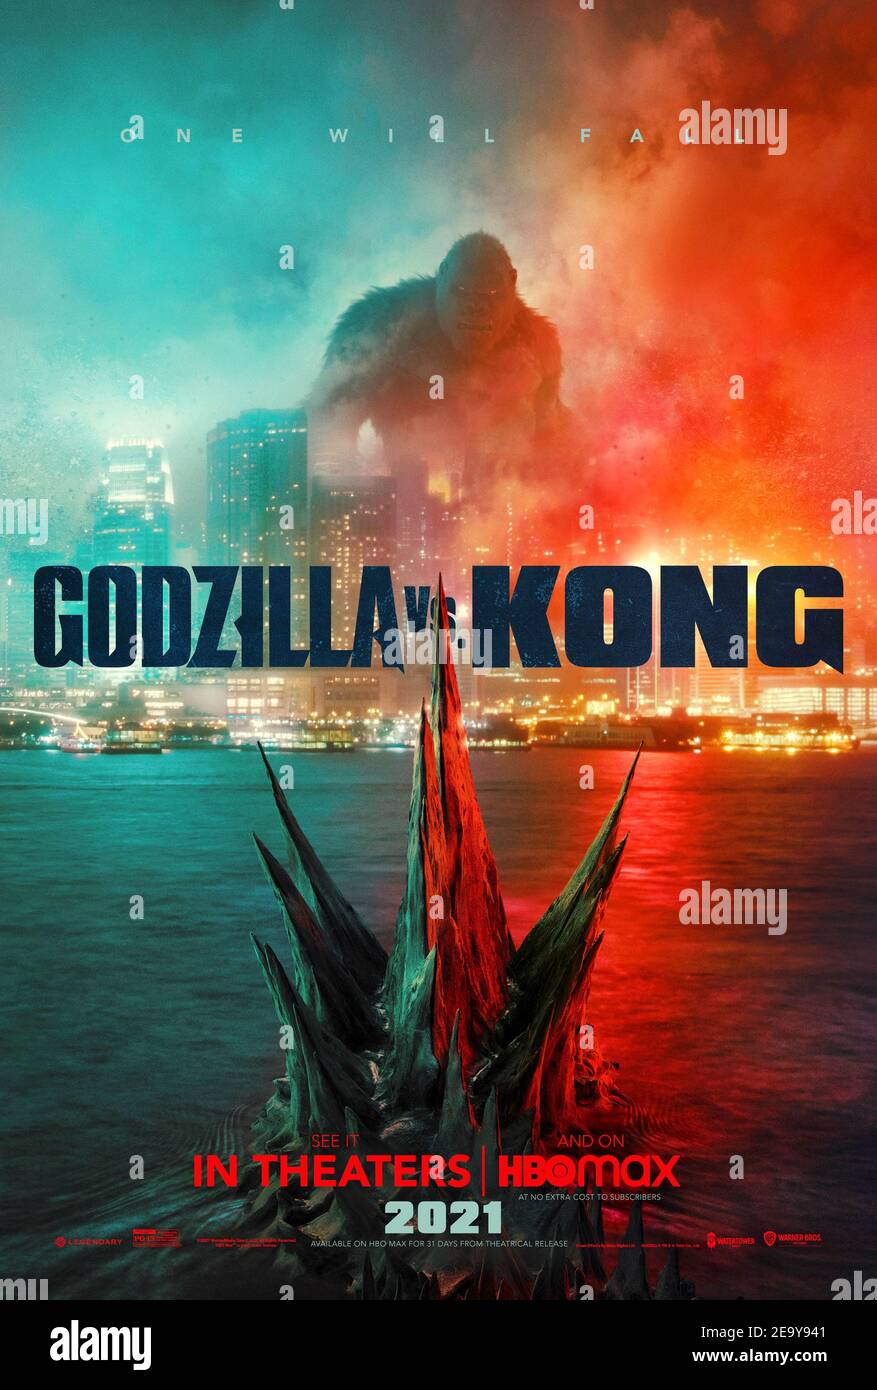 Godzilla vs. Kong (2021) directed by Adam Wingard and starring Alexander Skarsgård, Millie Bobby Brown and Rebecca Hall. Following the event of Godzilla: King of the Monsters (2019), the next chapter in the Monsterverse sees the legendary Godzilla and King Kong go head to head with the fate of humanity caught in the balance. Stock Photo